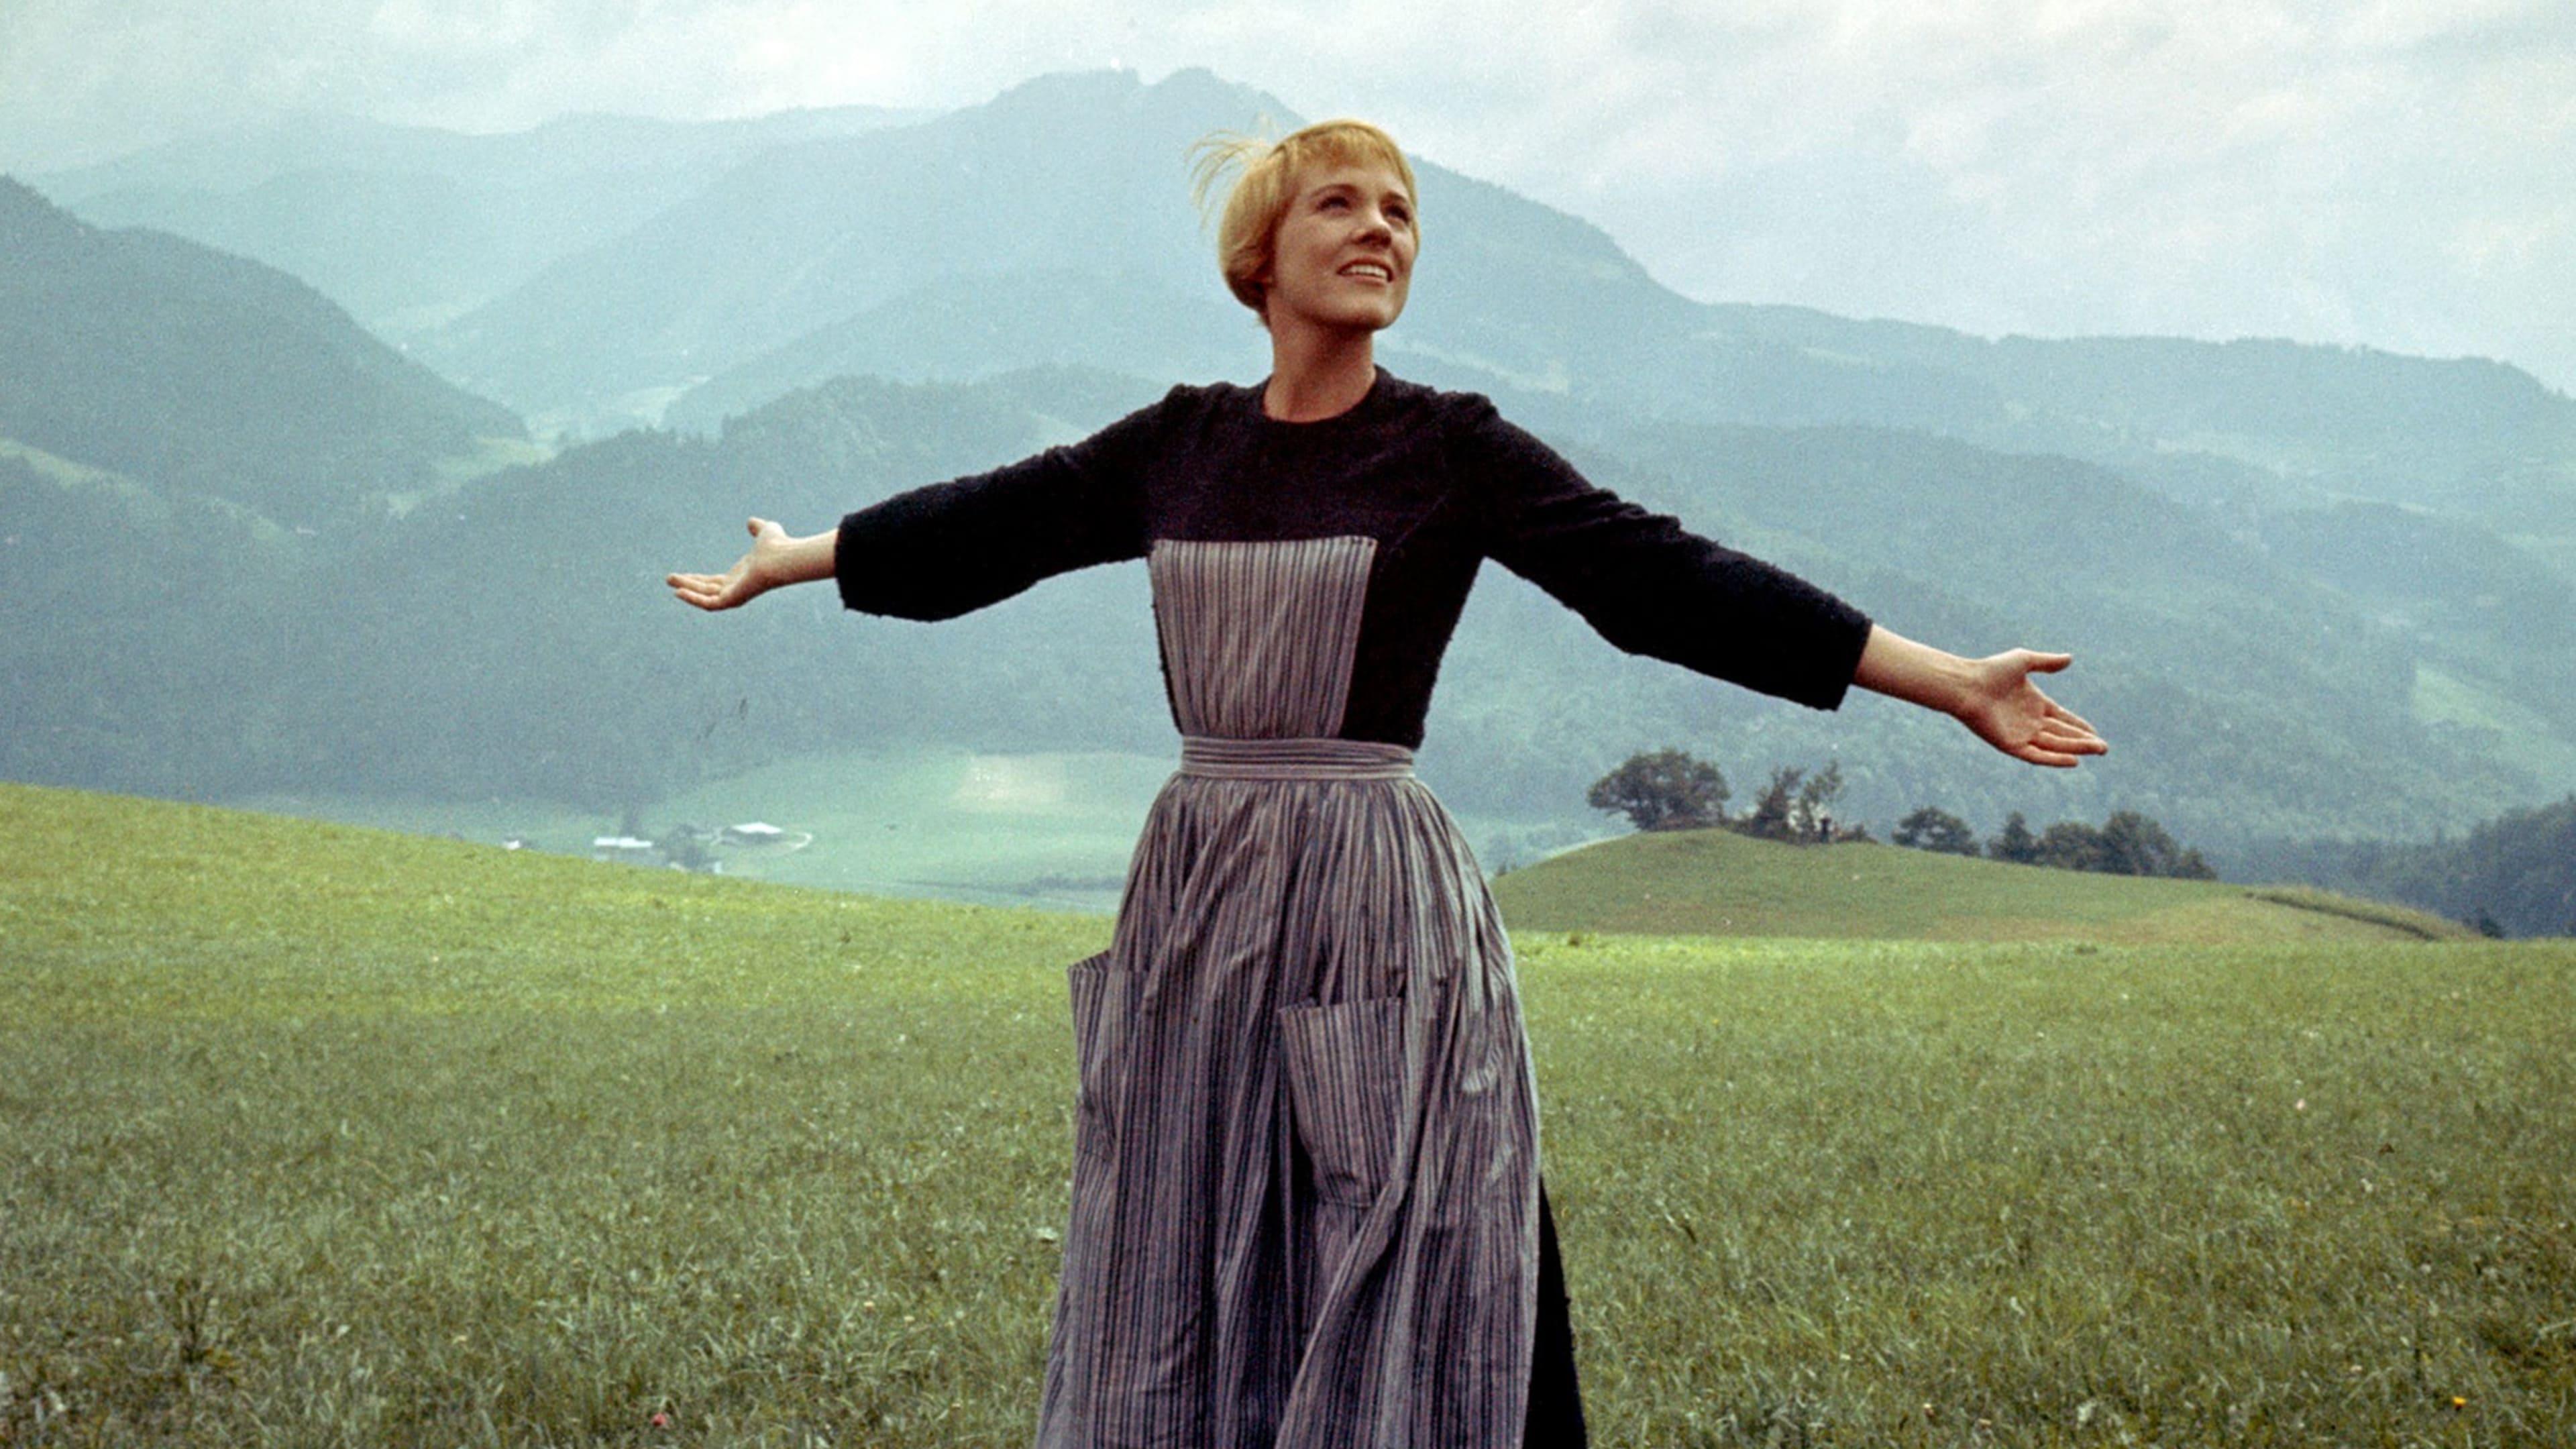 The Sound of Music backdrop